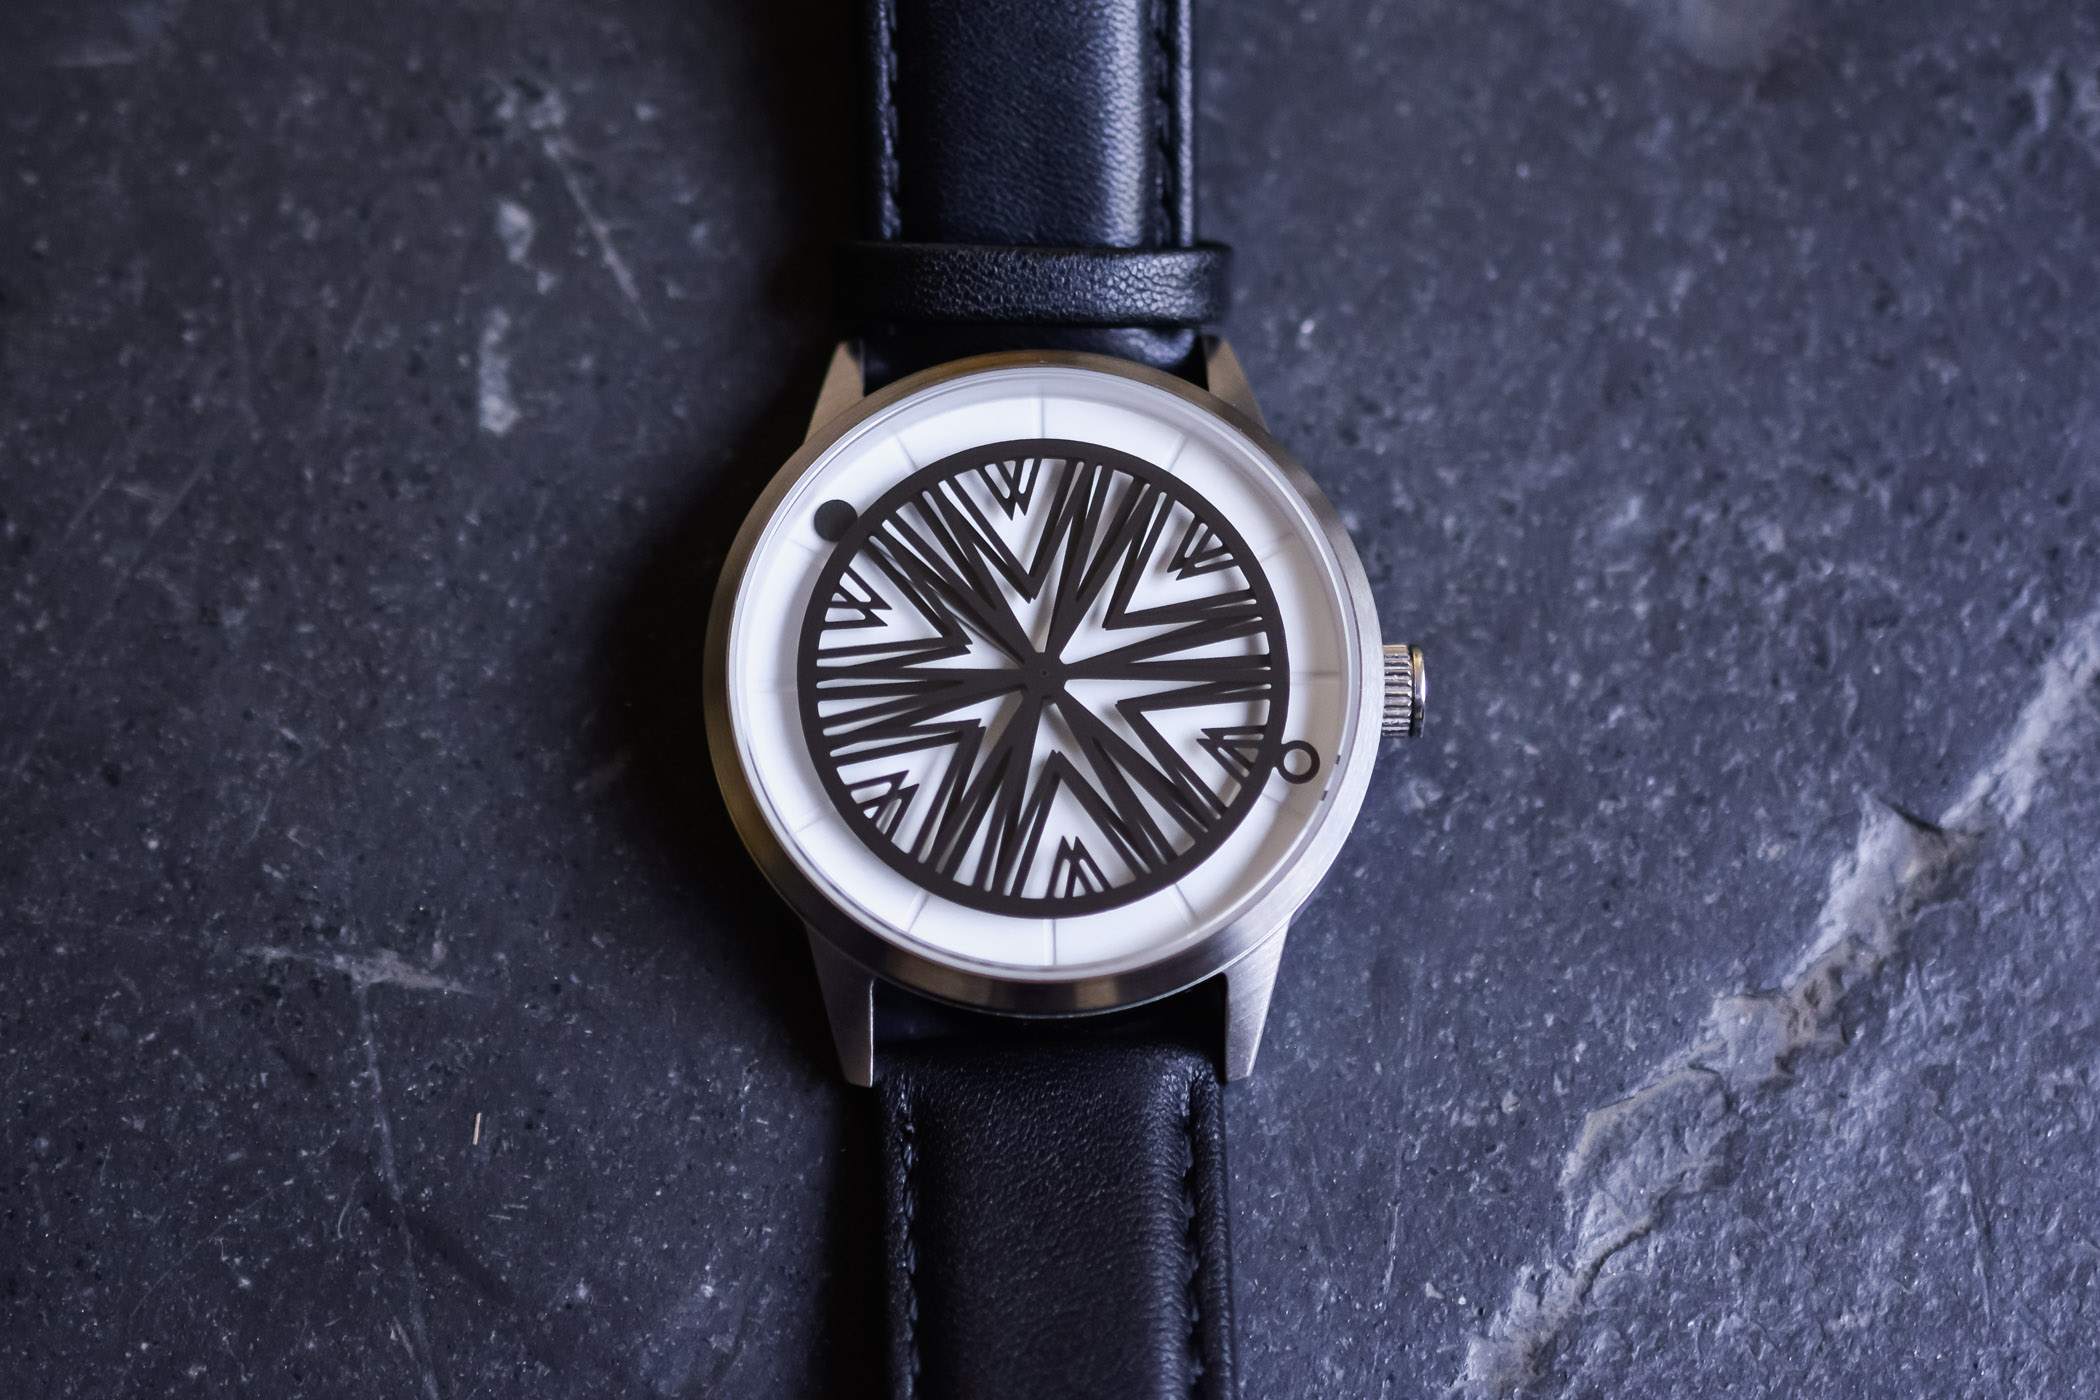 Humism Rhizome Automatic - Accessible Kinetic Art Watch